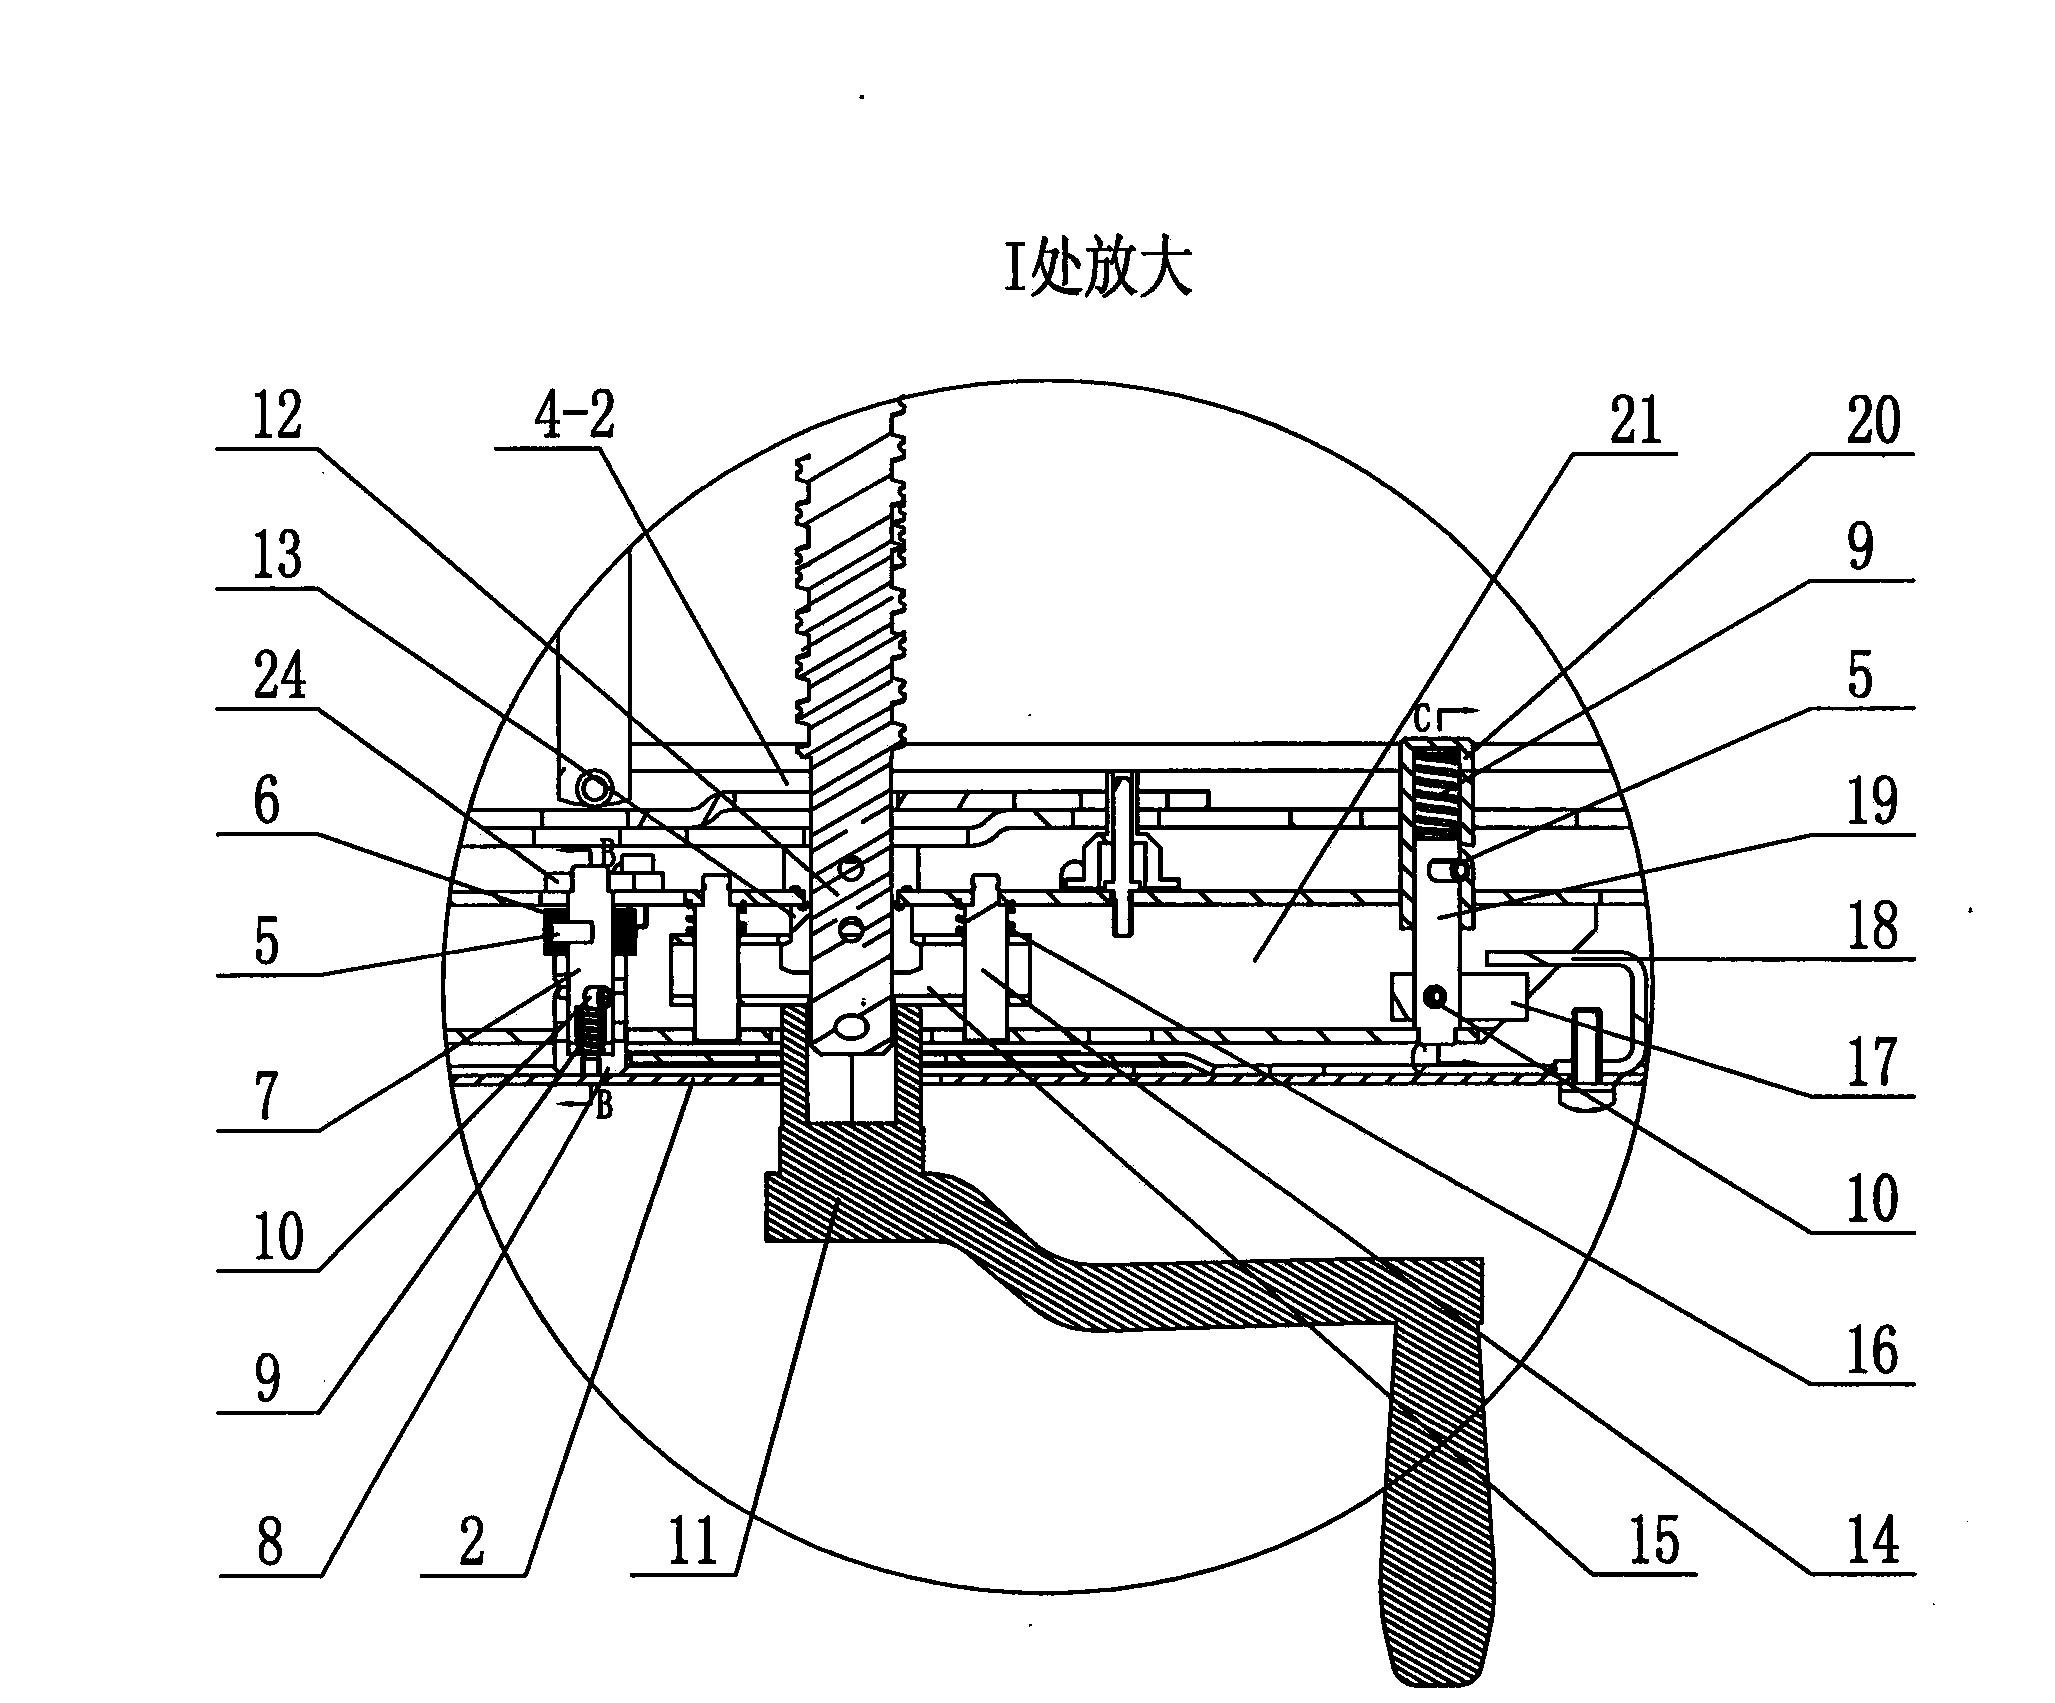 Device for interlocking chassis vehicle with cabinet door of circuit breaker chamber